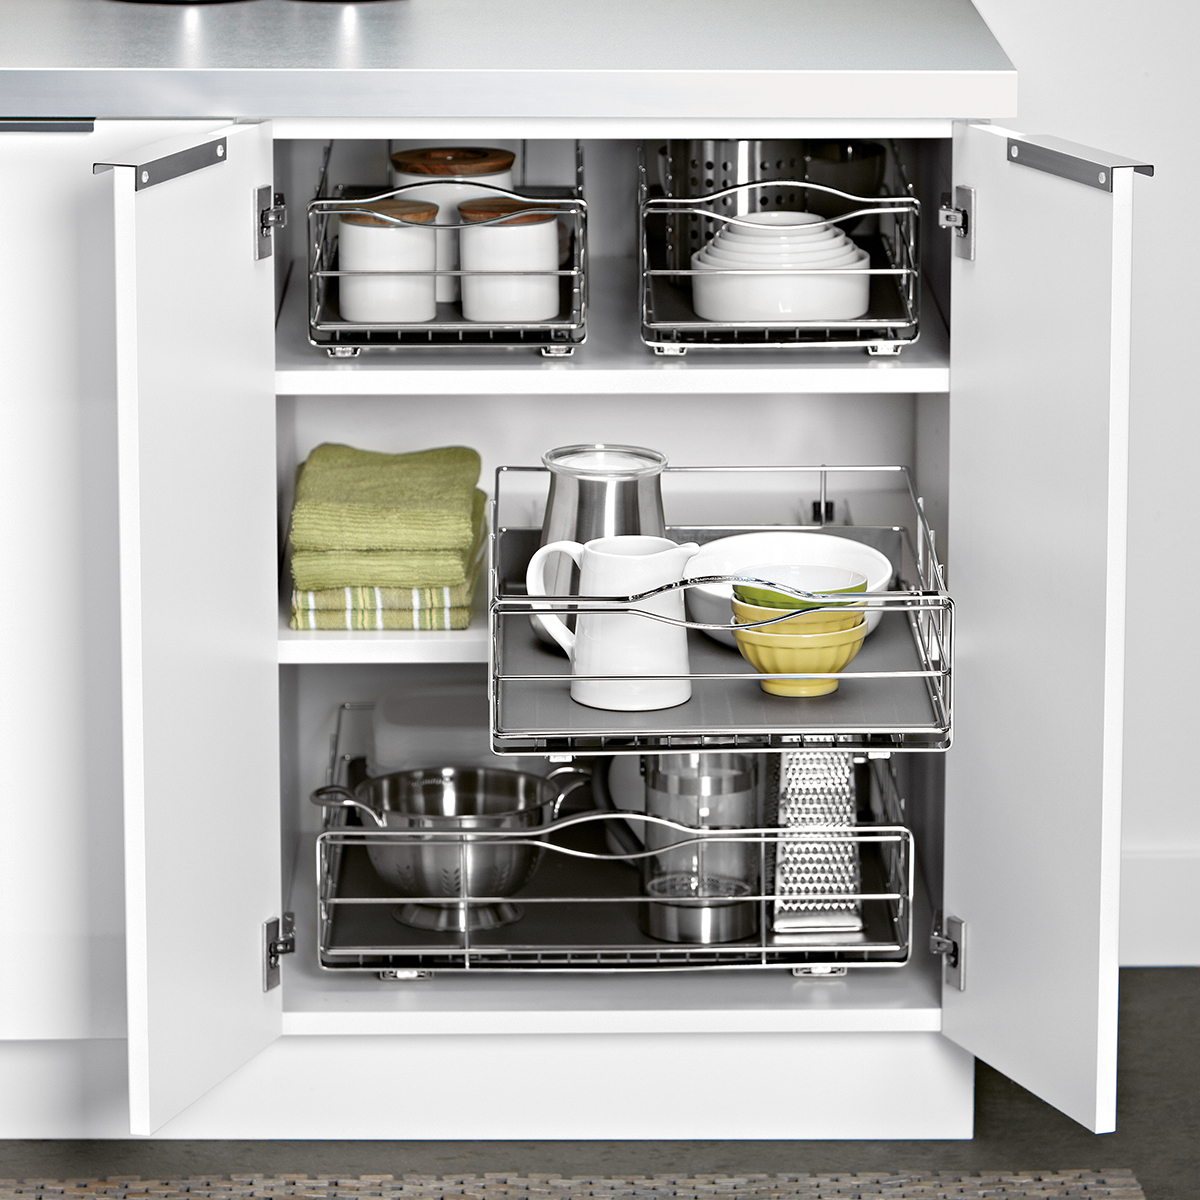 https://www.containerstore.com/catalogimages/378355/10052286-SH-Pull_Out_Cabinet_Organiz.jpg